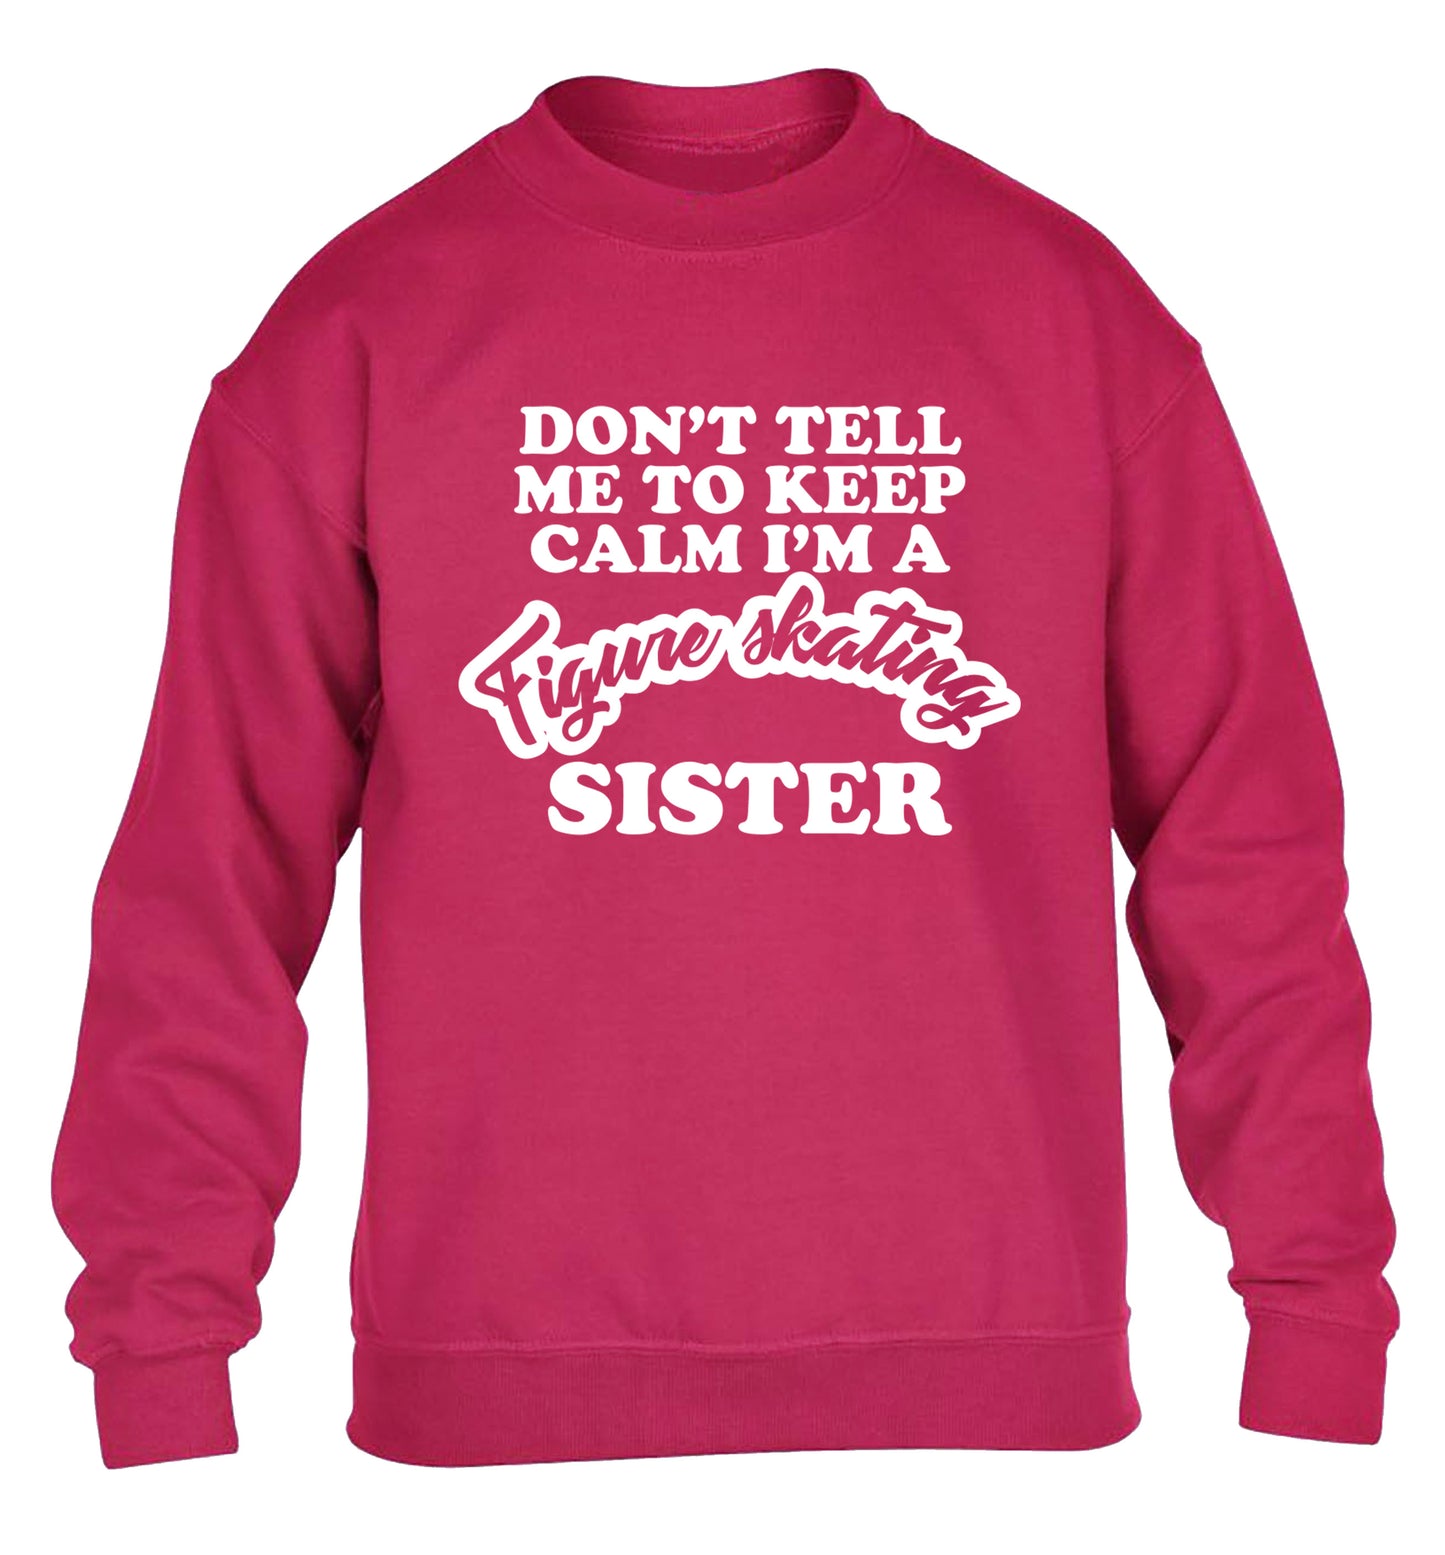 Don't tell me to keep calm I'm a figure skating sister children's pink sweater 12-14 Years